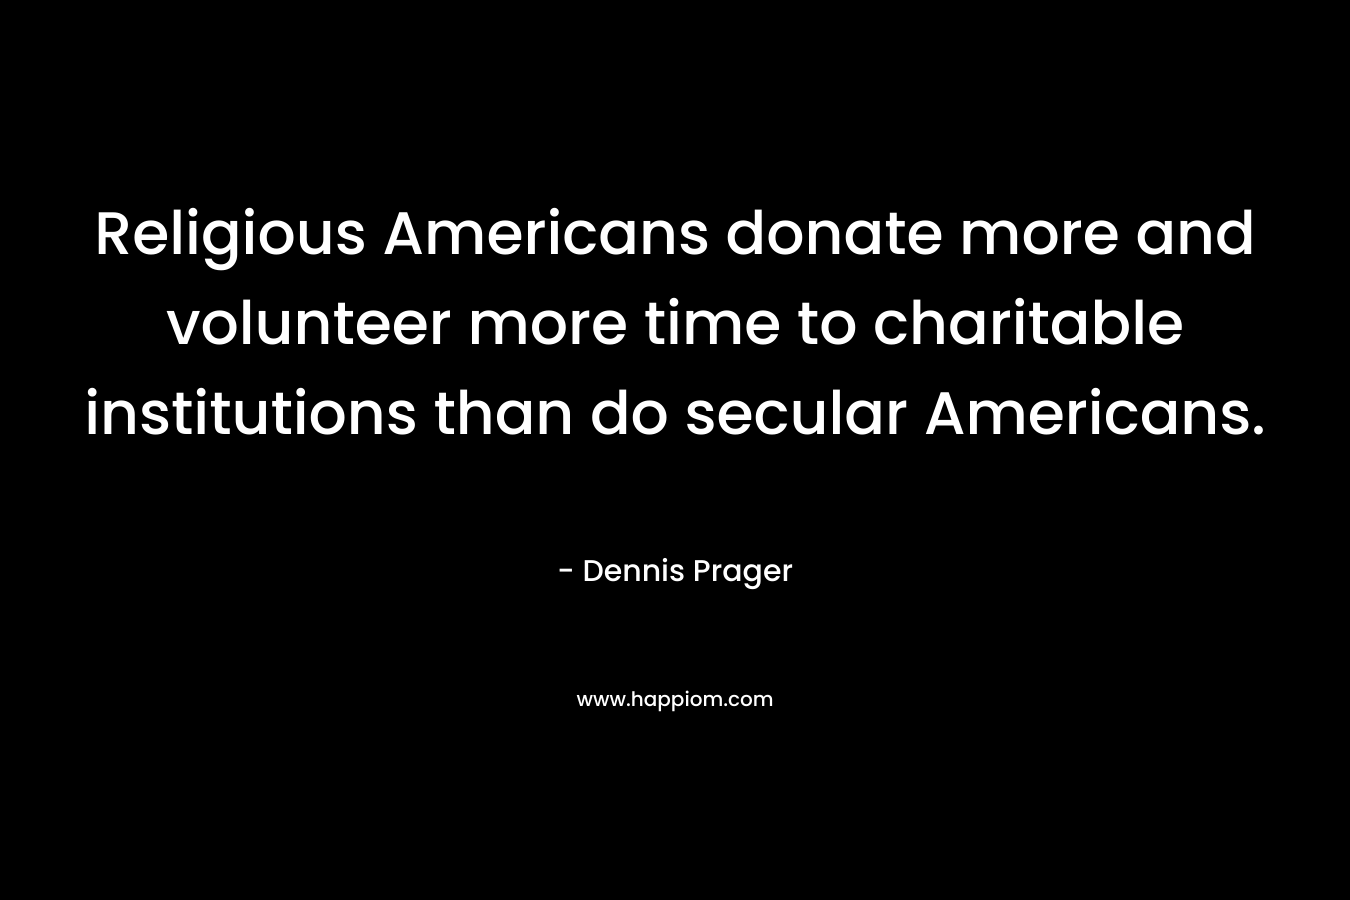 Religious Americans donate more and volunteer more time to charitable institutions than do secular Americans. – Dennis Prager